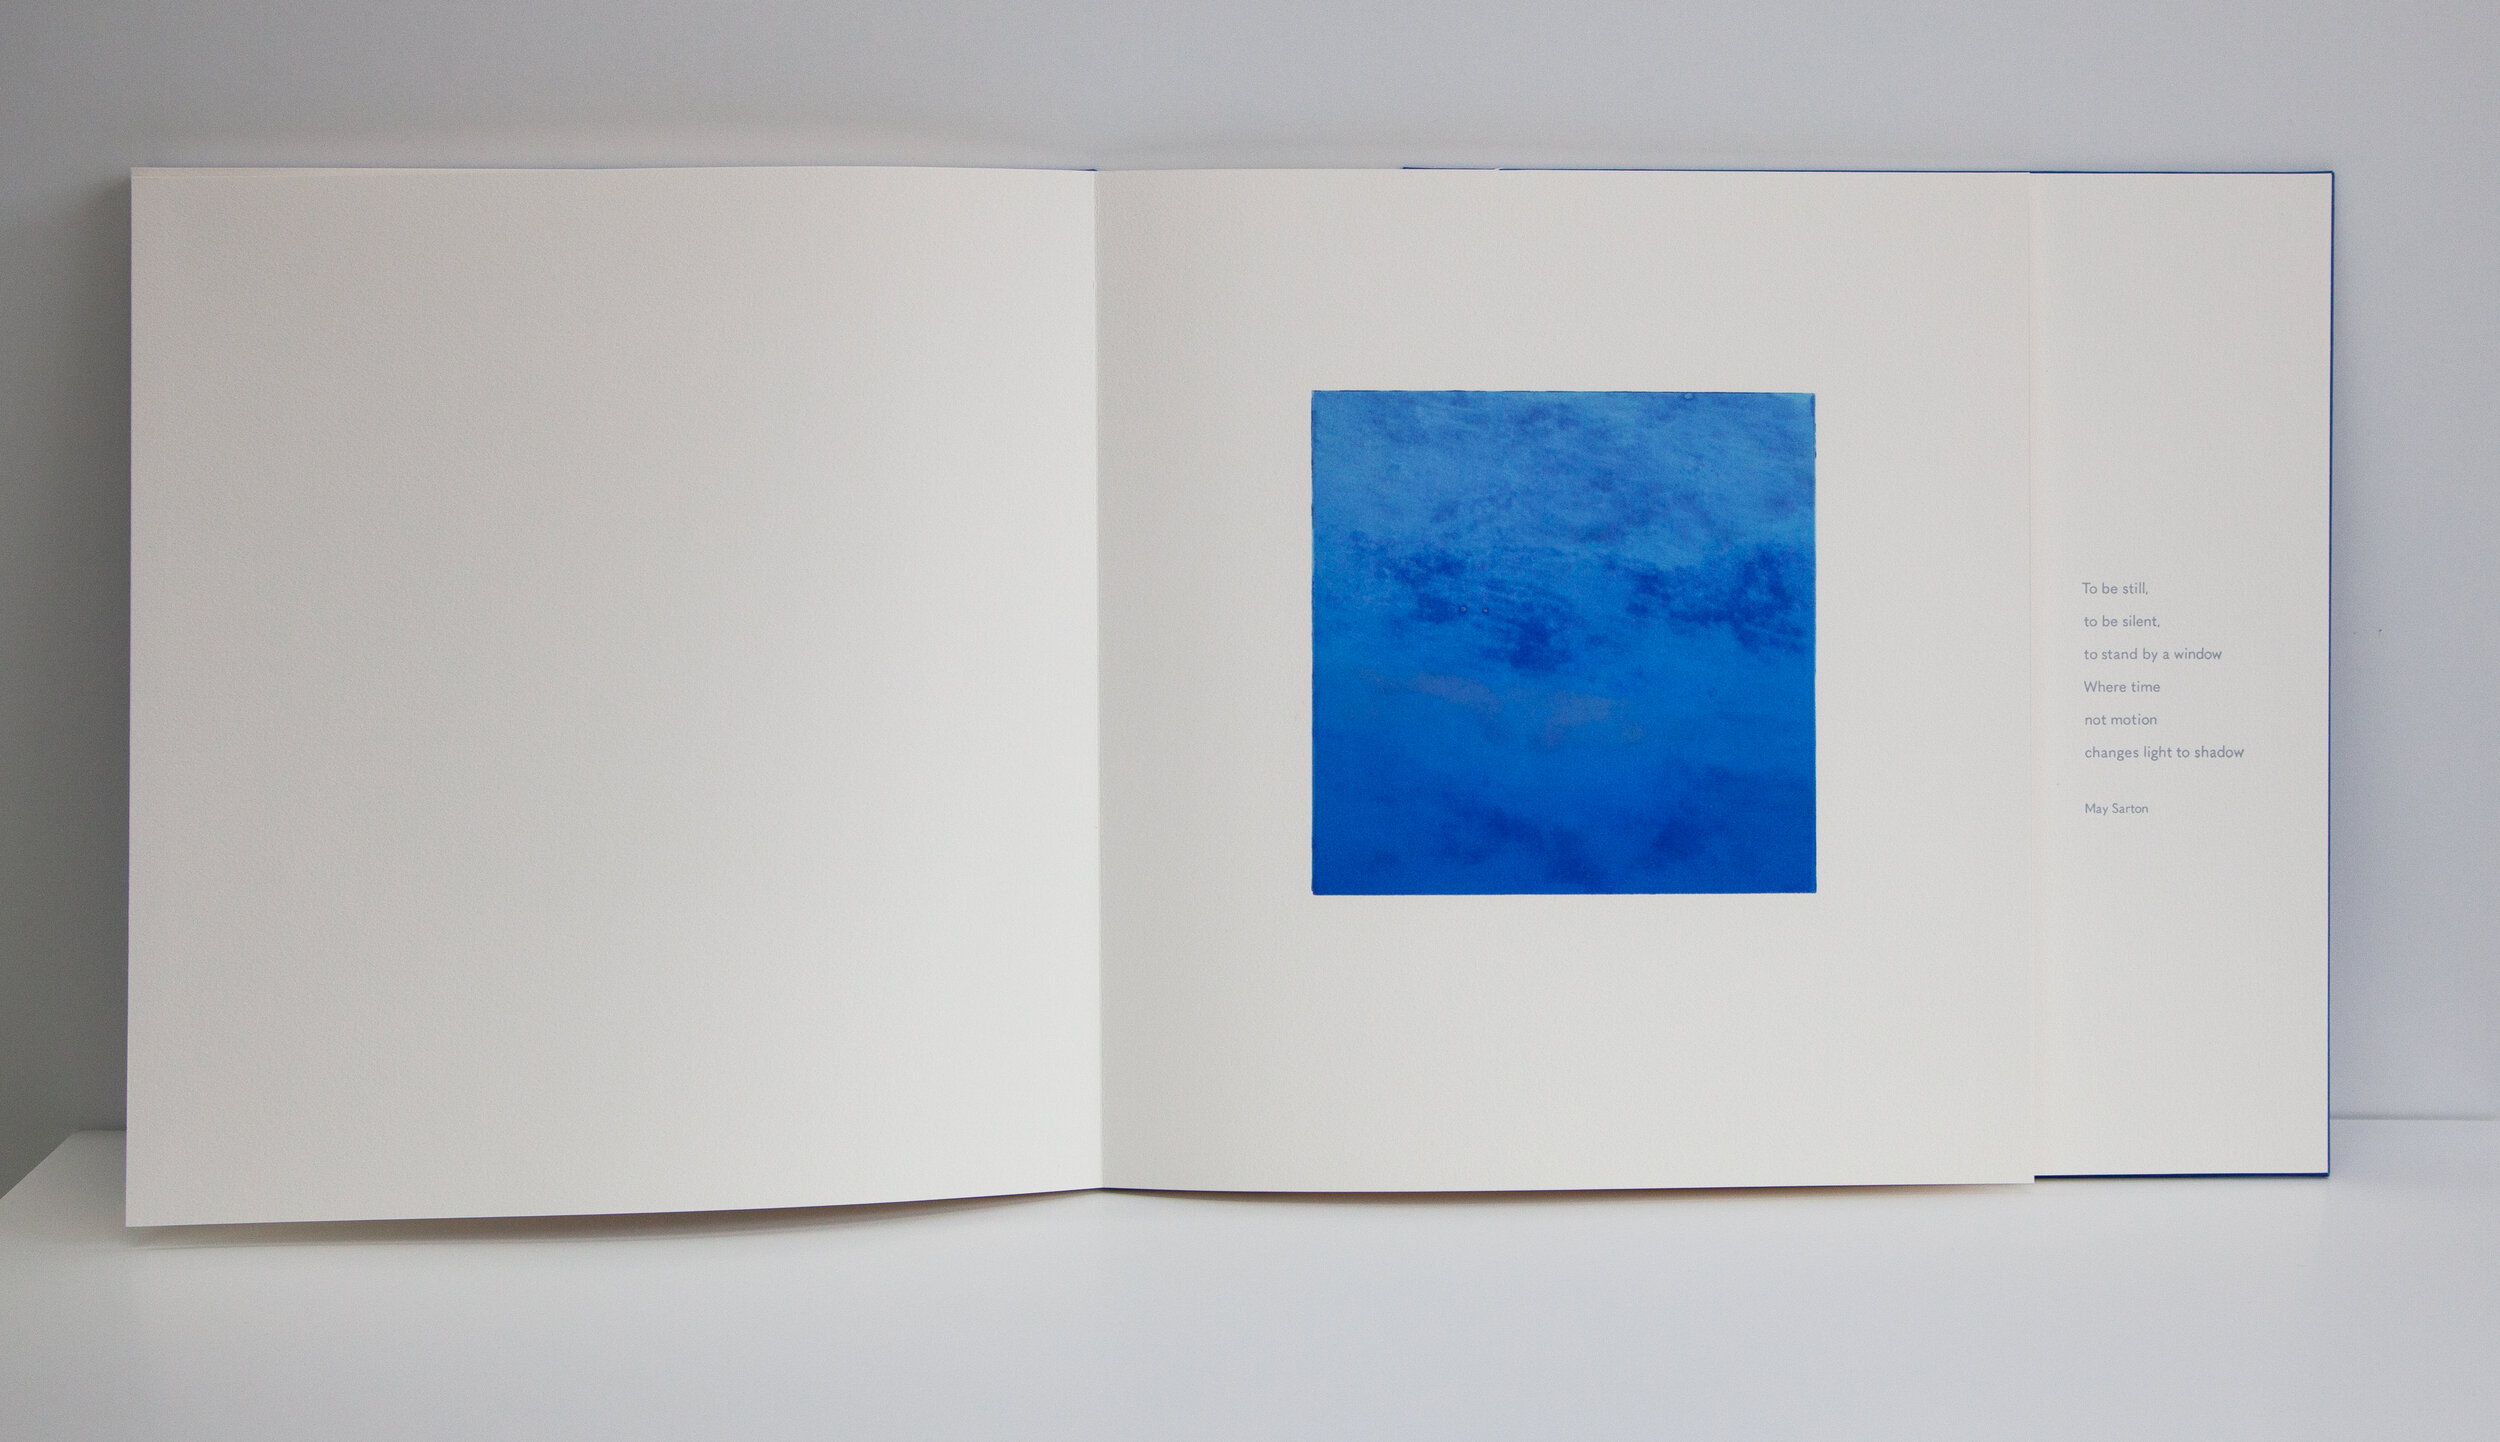   To Be Still and Think  (Blue) Monotype Book Image and Paper size: 15 x 13.5 x 1.5 inches Unique 